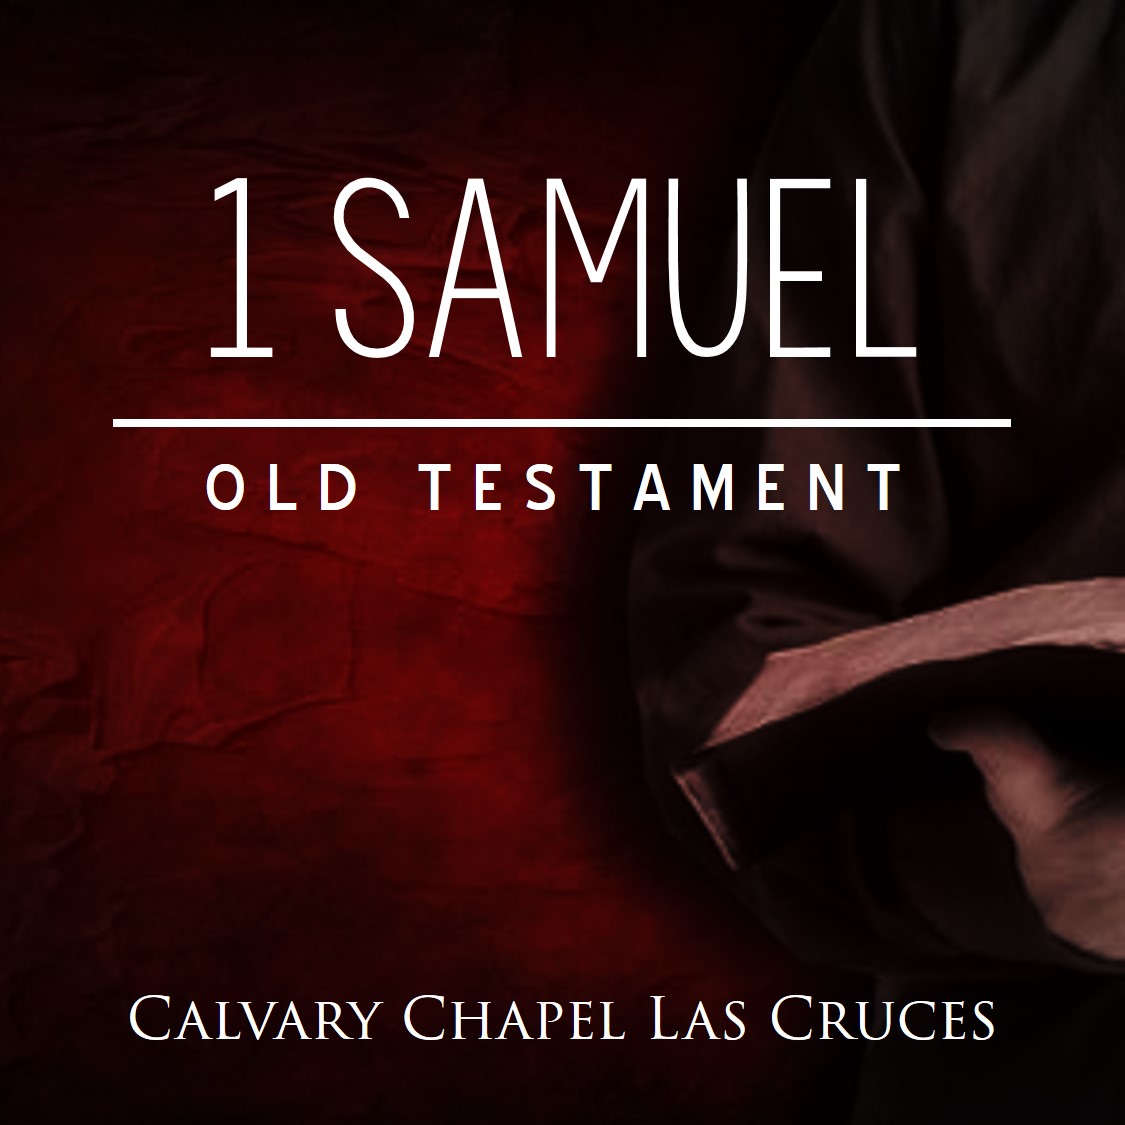 1 Samuel Chapters 14&15 - ”Jonathan’s Victory, Saul’s Failure of Disobedience”